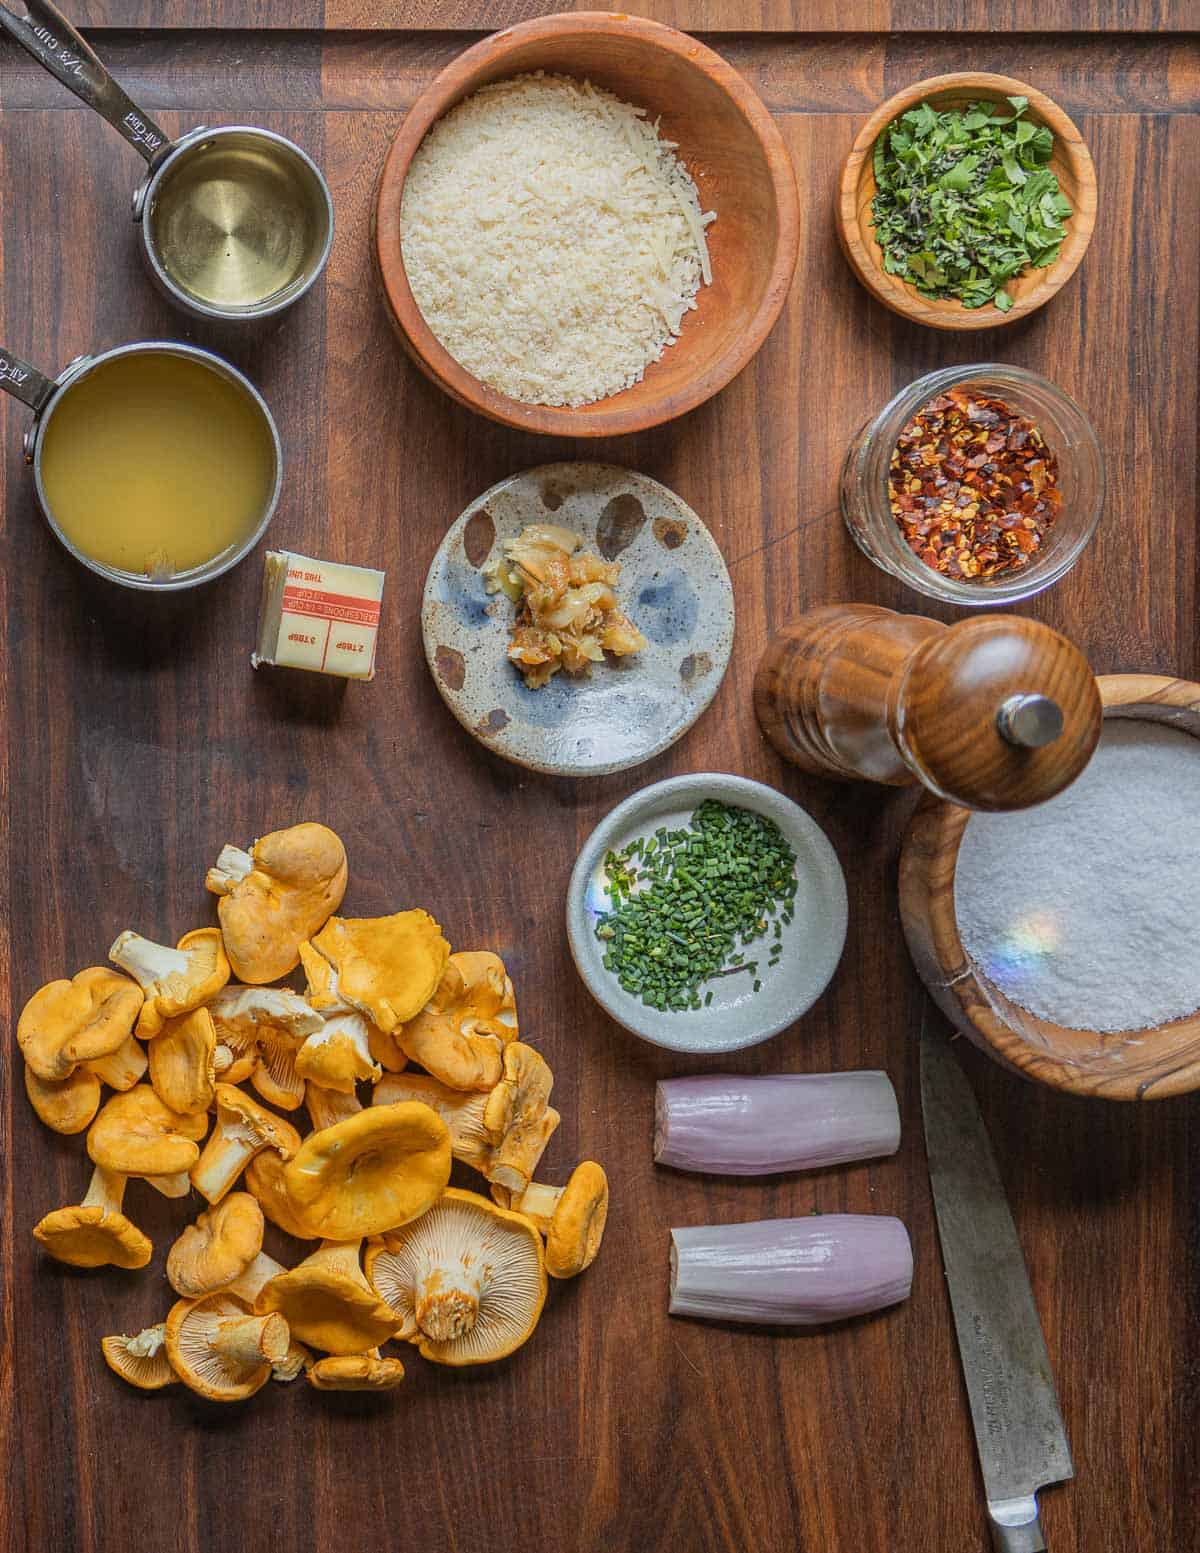 Ingredients for chanterelle mushroom pasta: chanterelles, shallots, roasted garlic, butter, wine, chicken stock, herbs, salt, and crushed red pepper. 